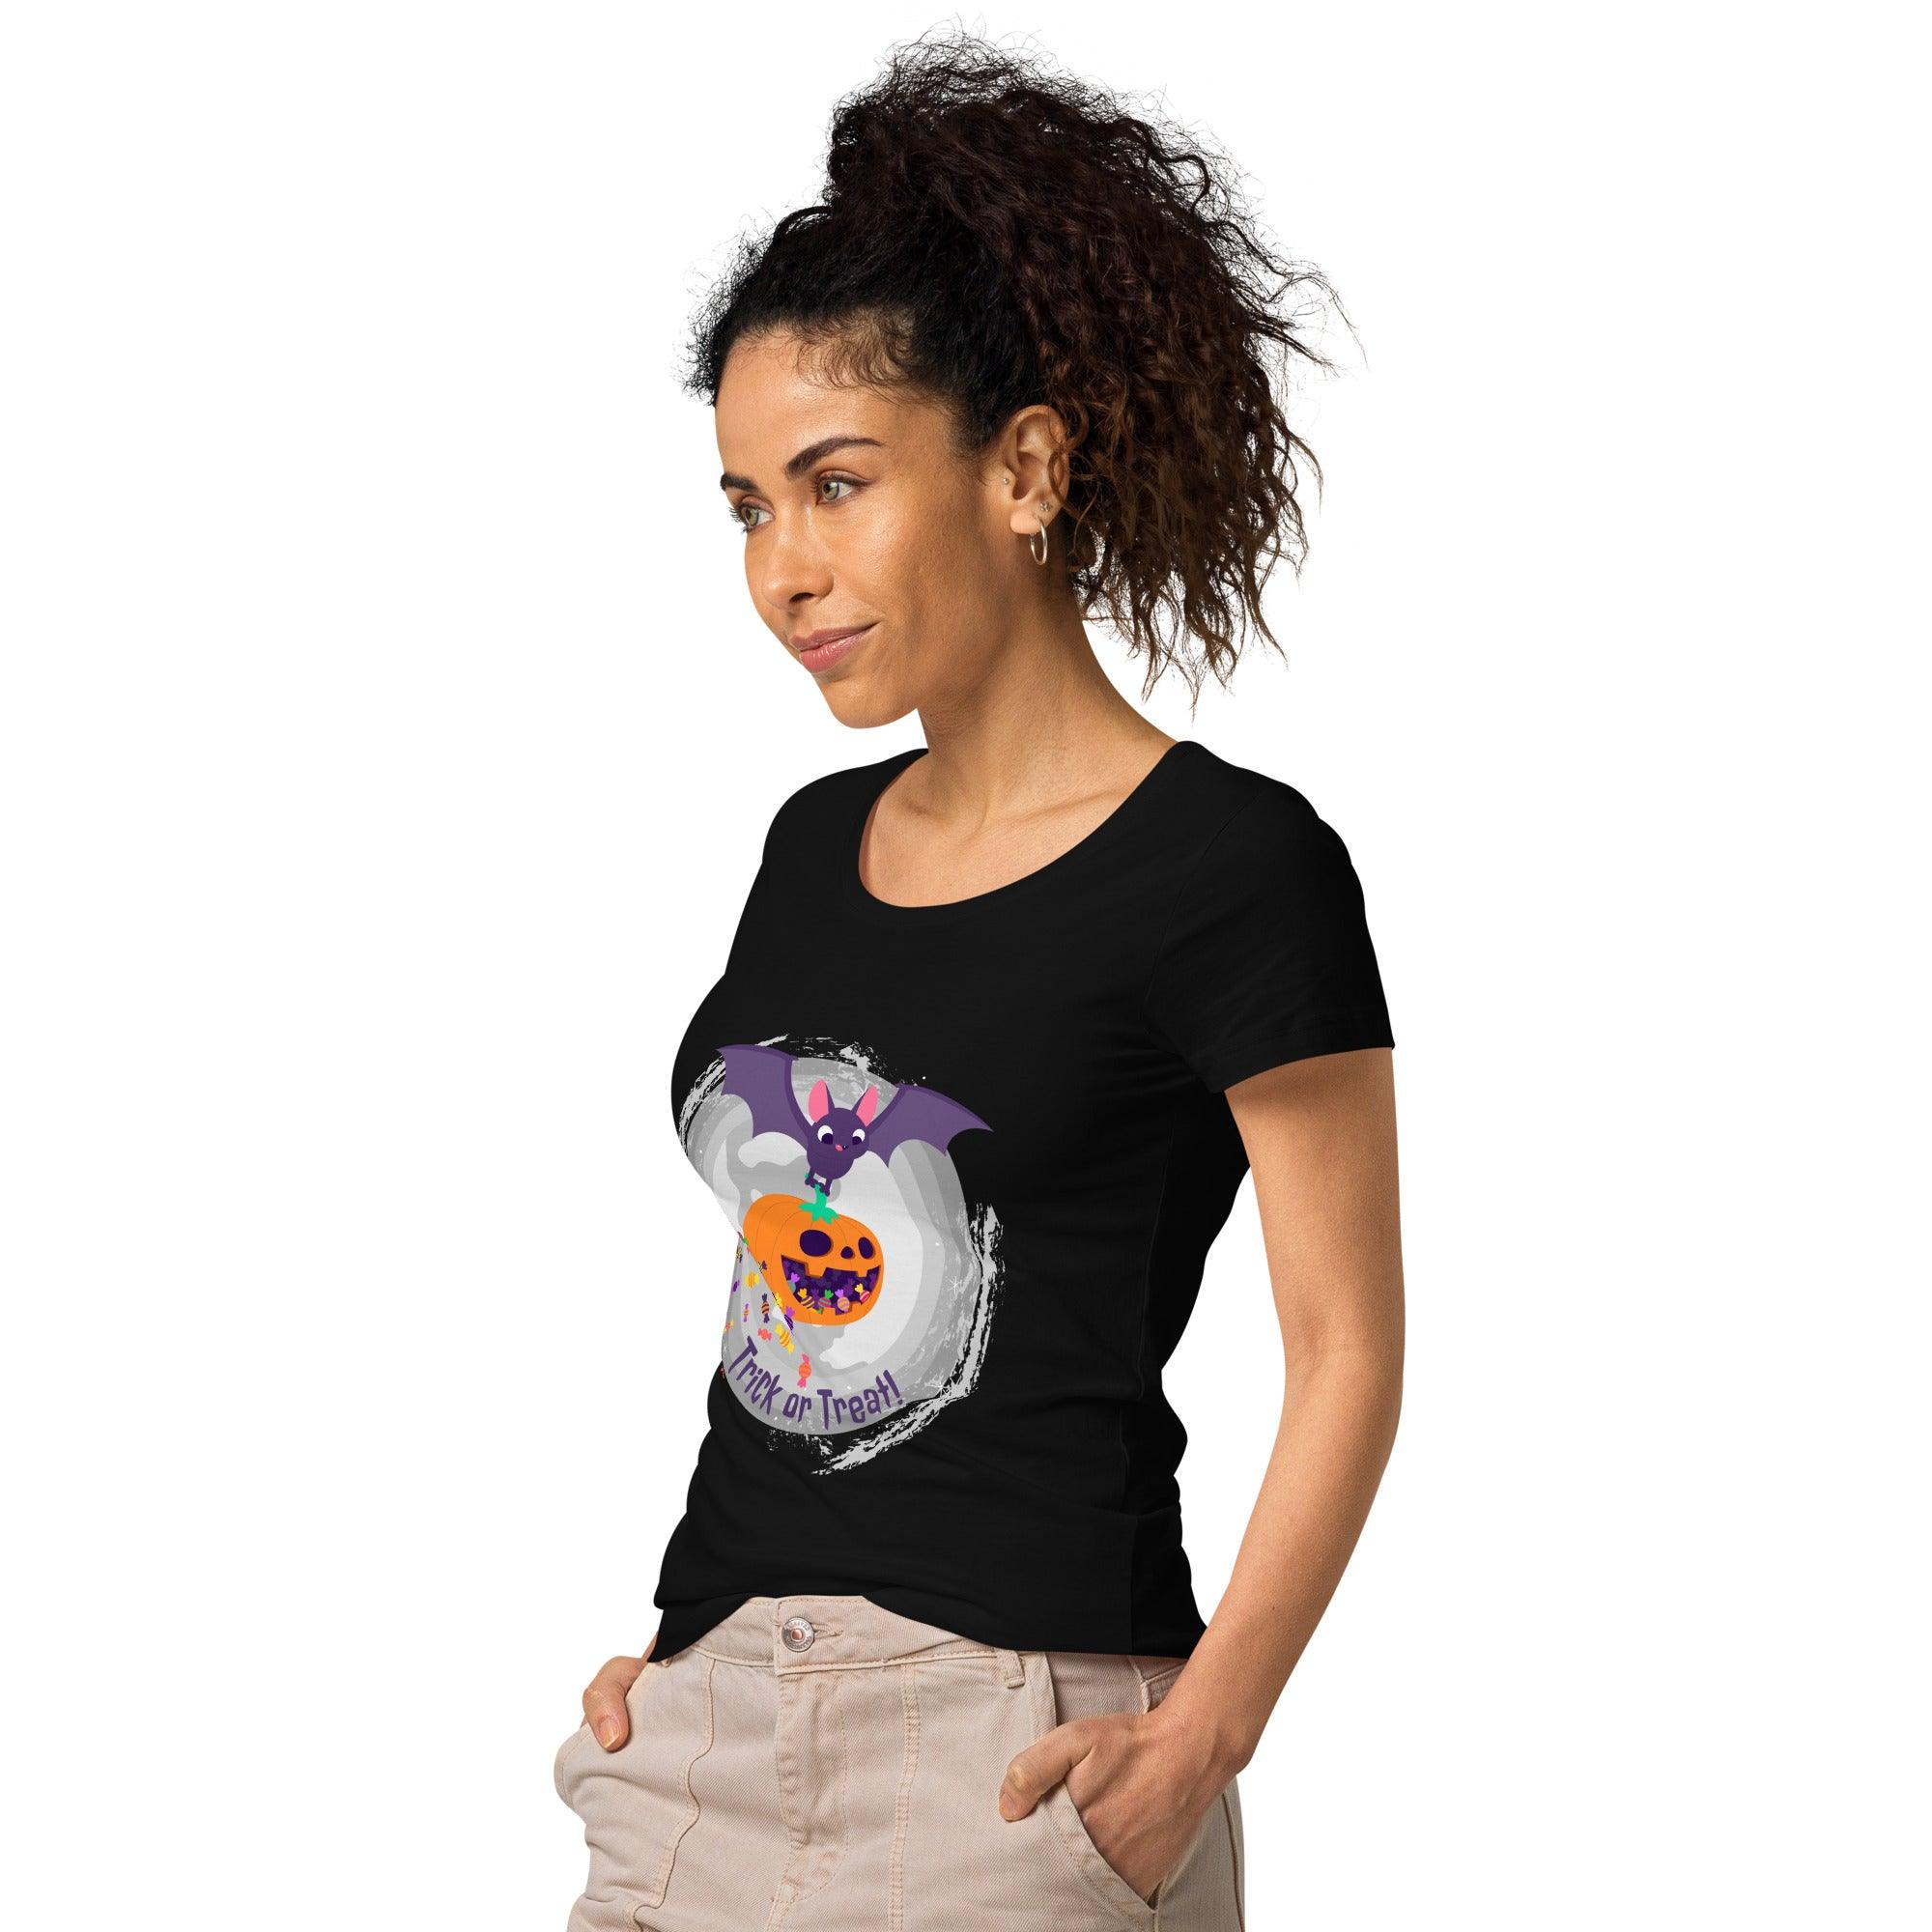 Styling the Halloween Organic T-Shirt with seasonal accessories, demonstrating a versatile and spellbinding outfit for October festivities.